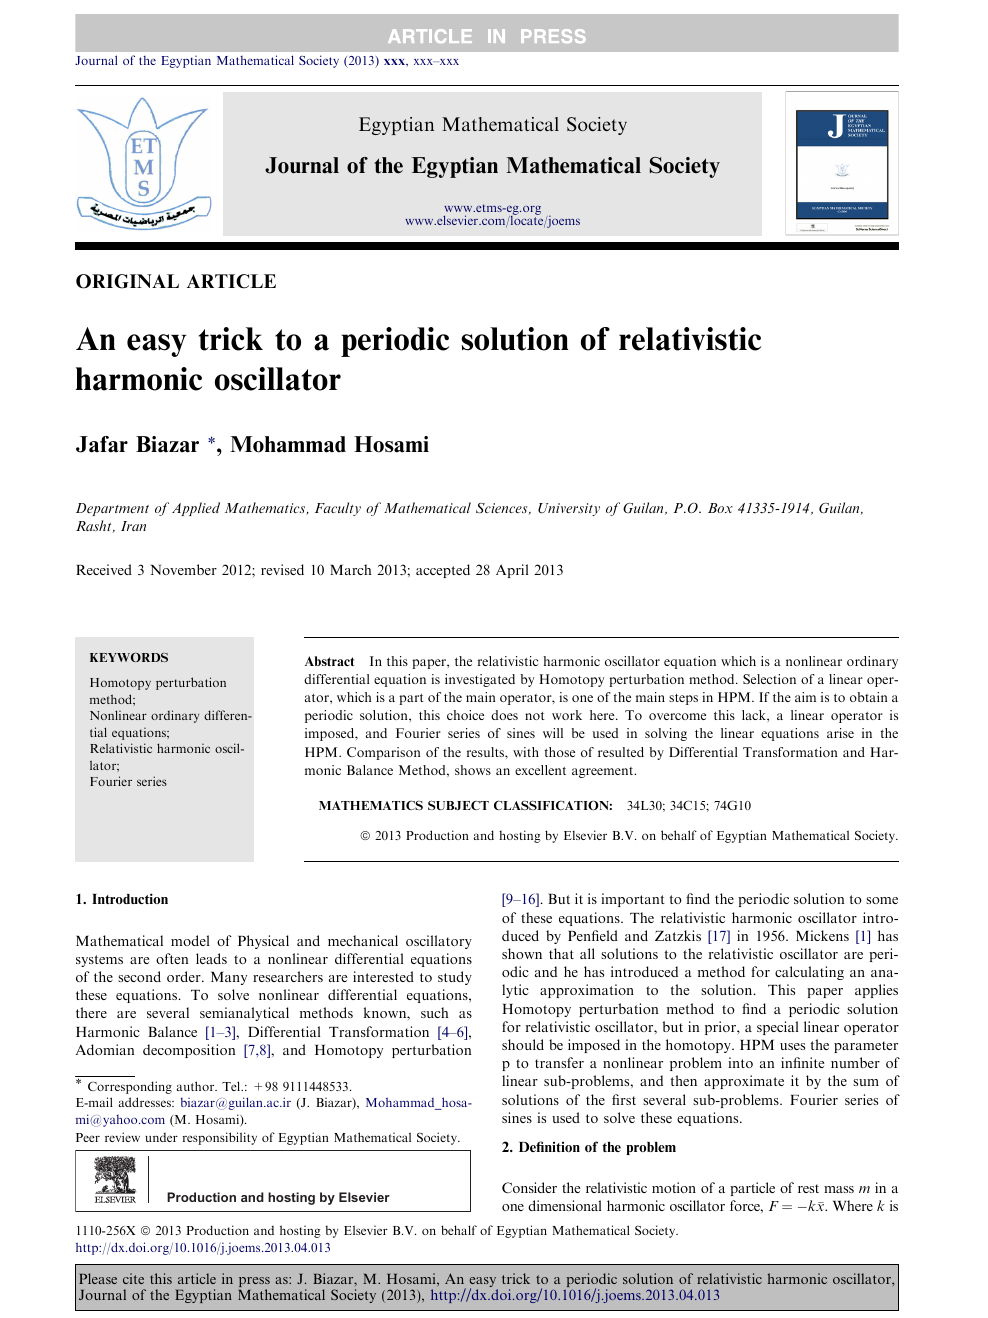 An Easy Trick To A Periodic Solution Of Relativistic Harmonic Oscillator Topic Of Research Paper In Physical Sciences Download Scholarly Article Pdf And Read For Free On Cyberleninka Open Science Hub